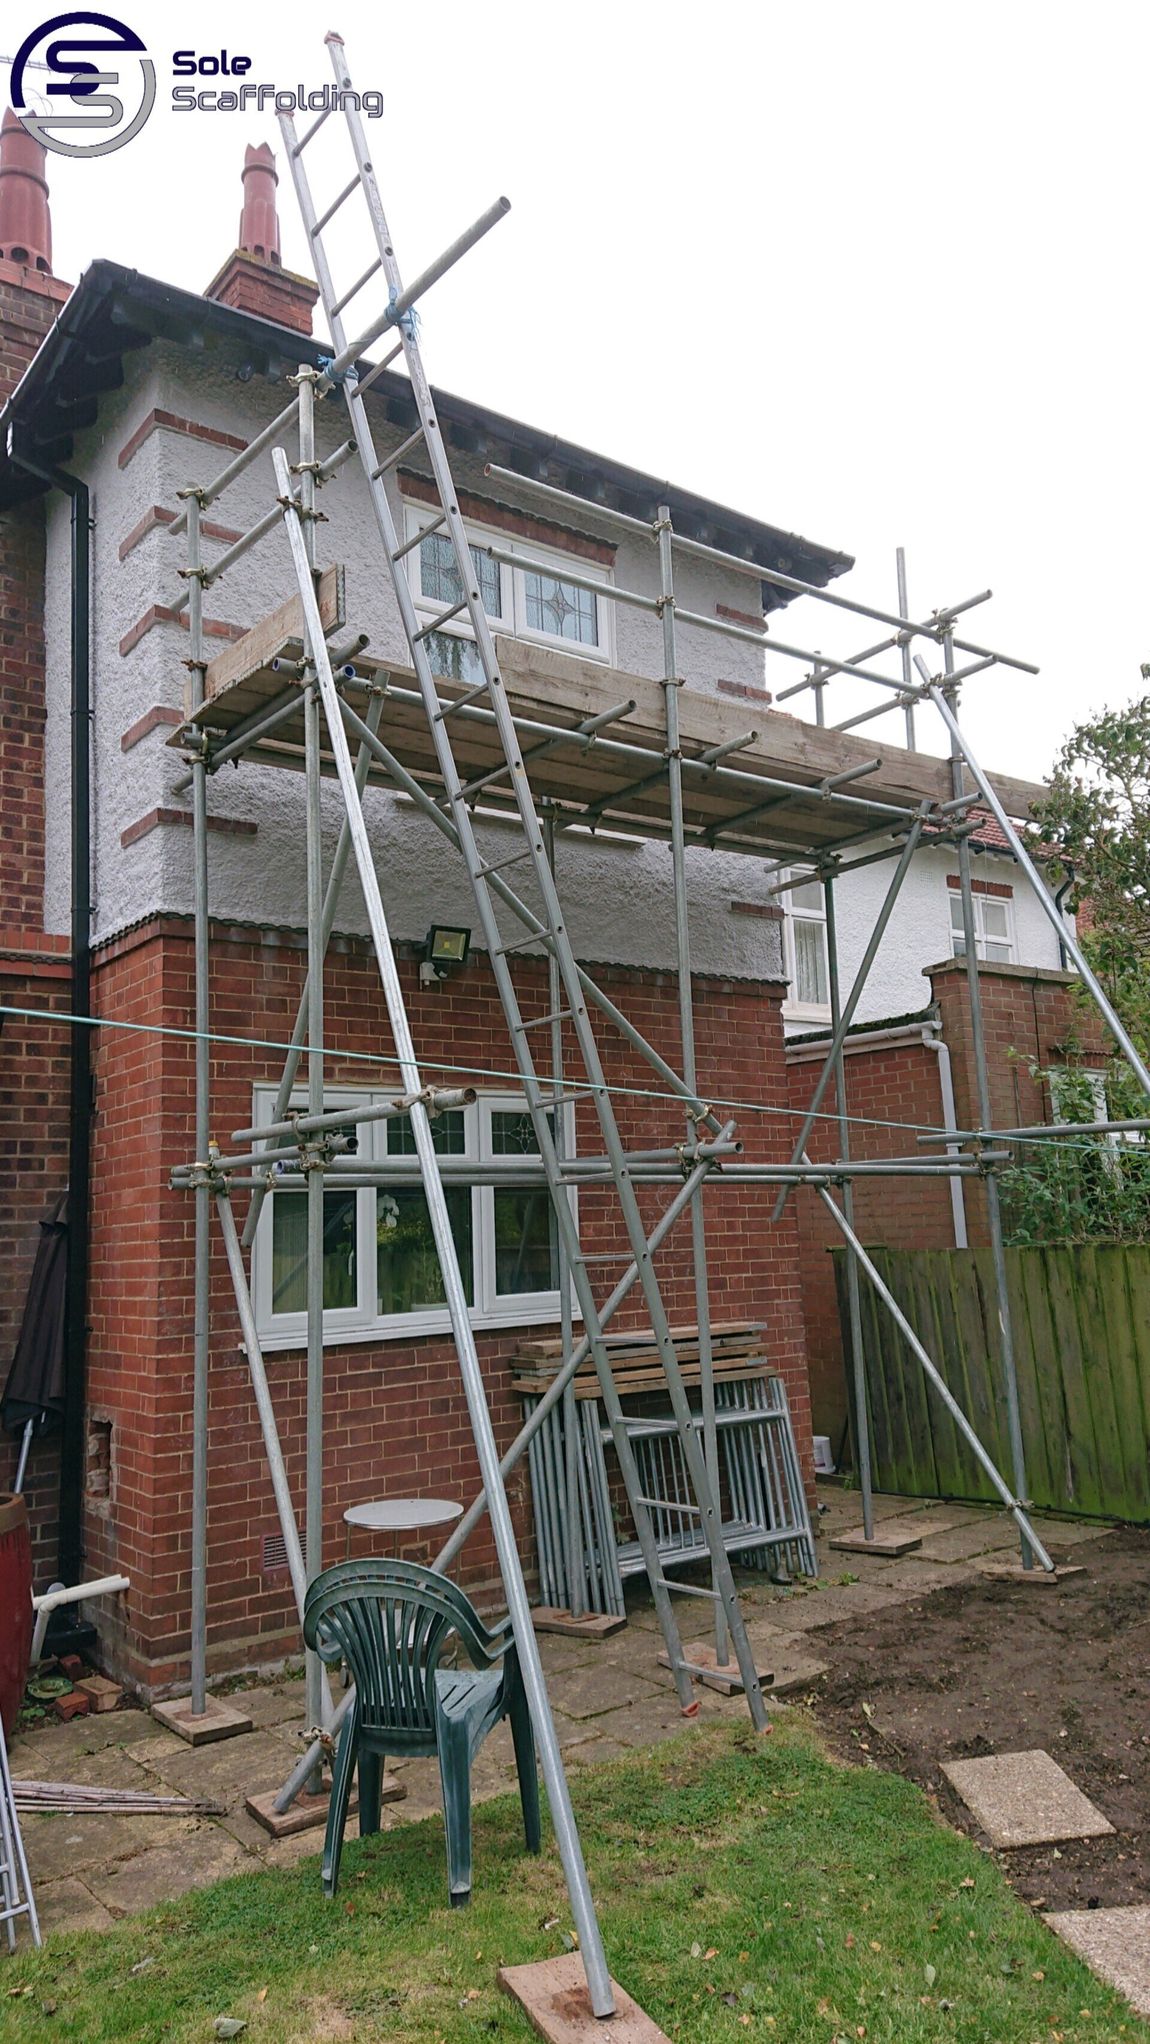 sole scaffolding - scaffold for painting at rear of property